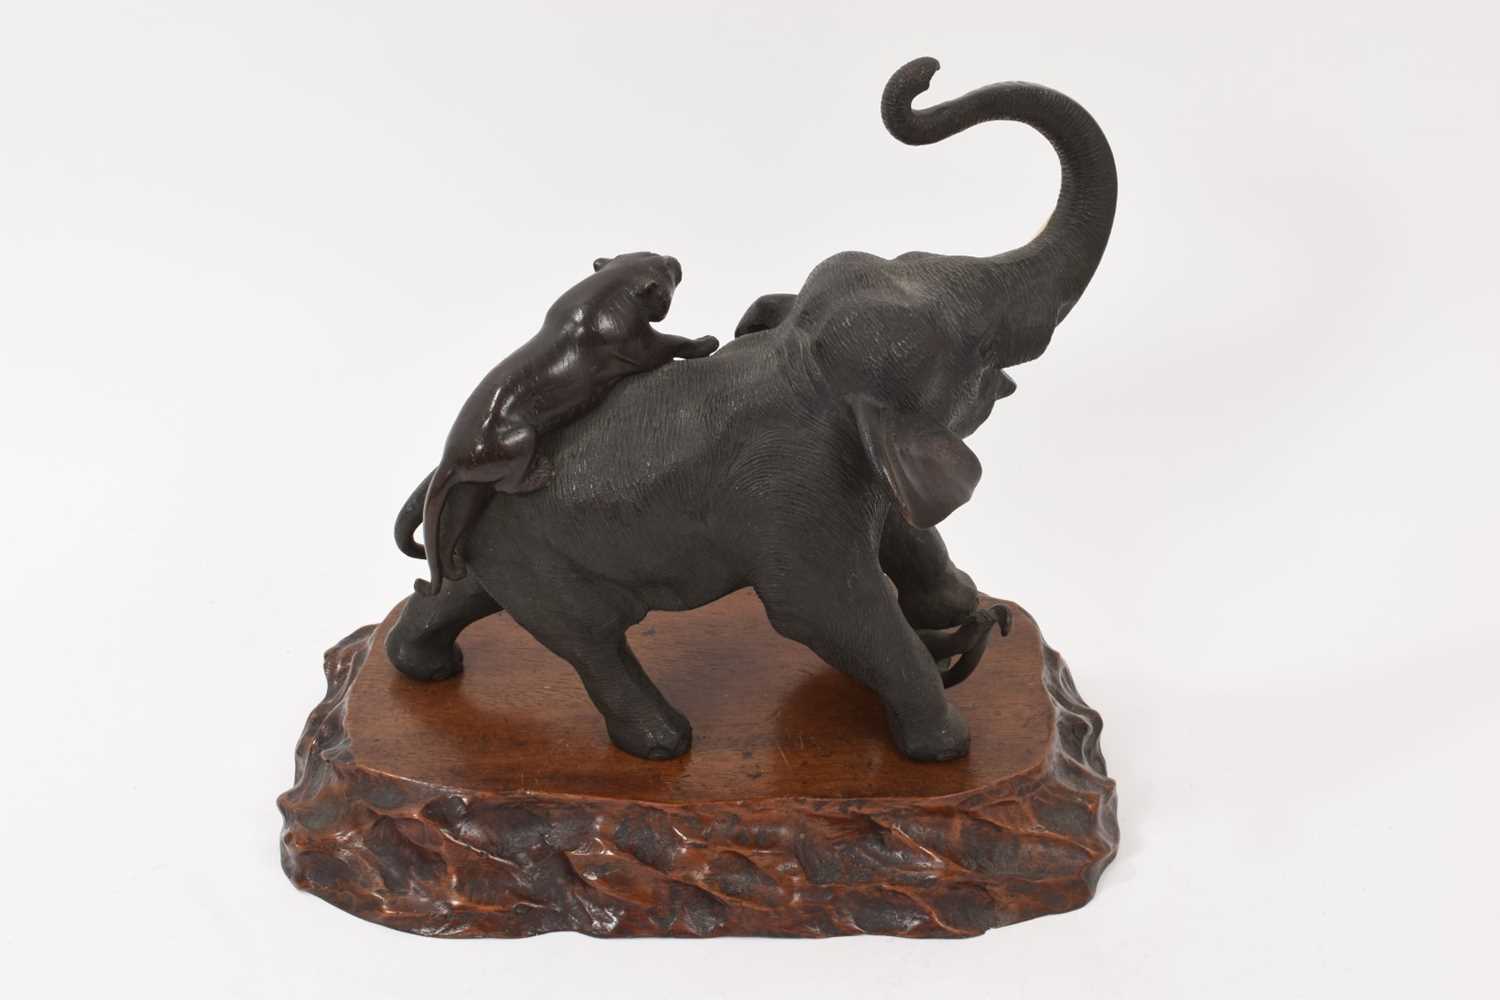 Late 19th century/early 20th century Japanese bronze sculpture of an elephant - Image 5 of 5